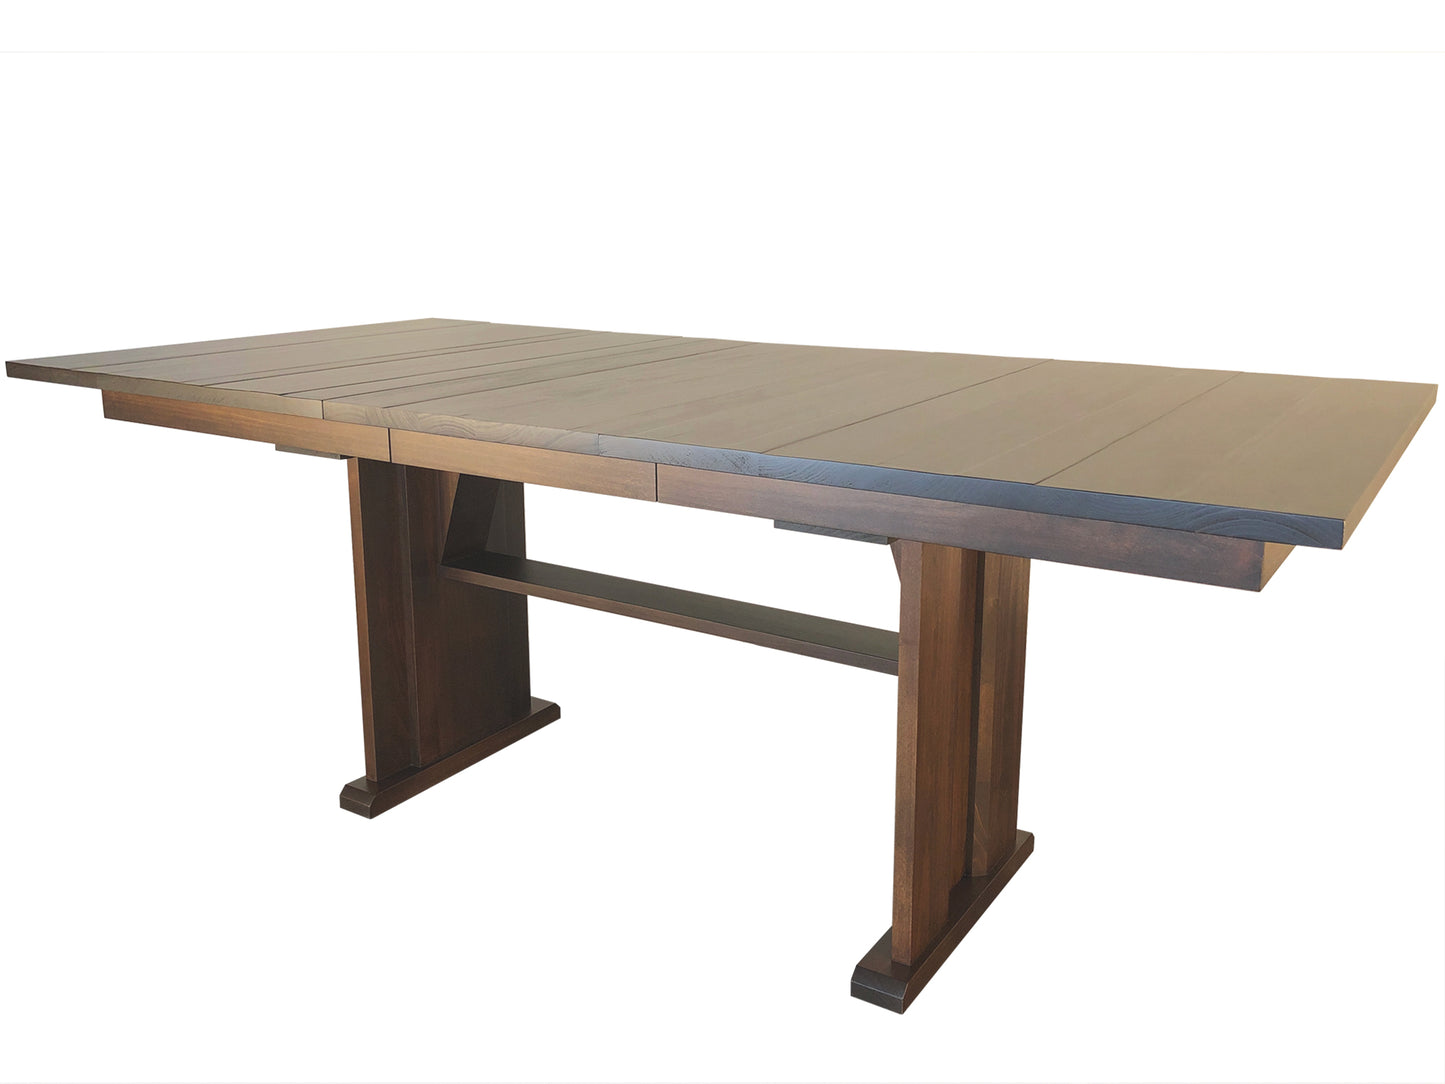 Vancouver Trestle Dining Table